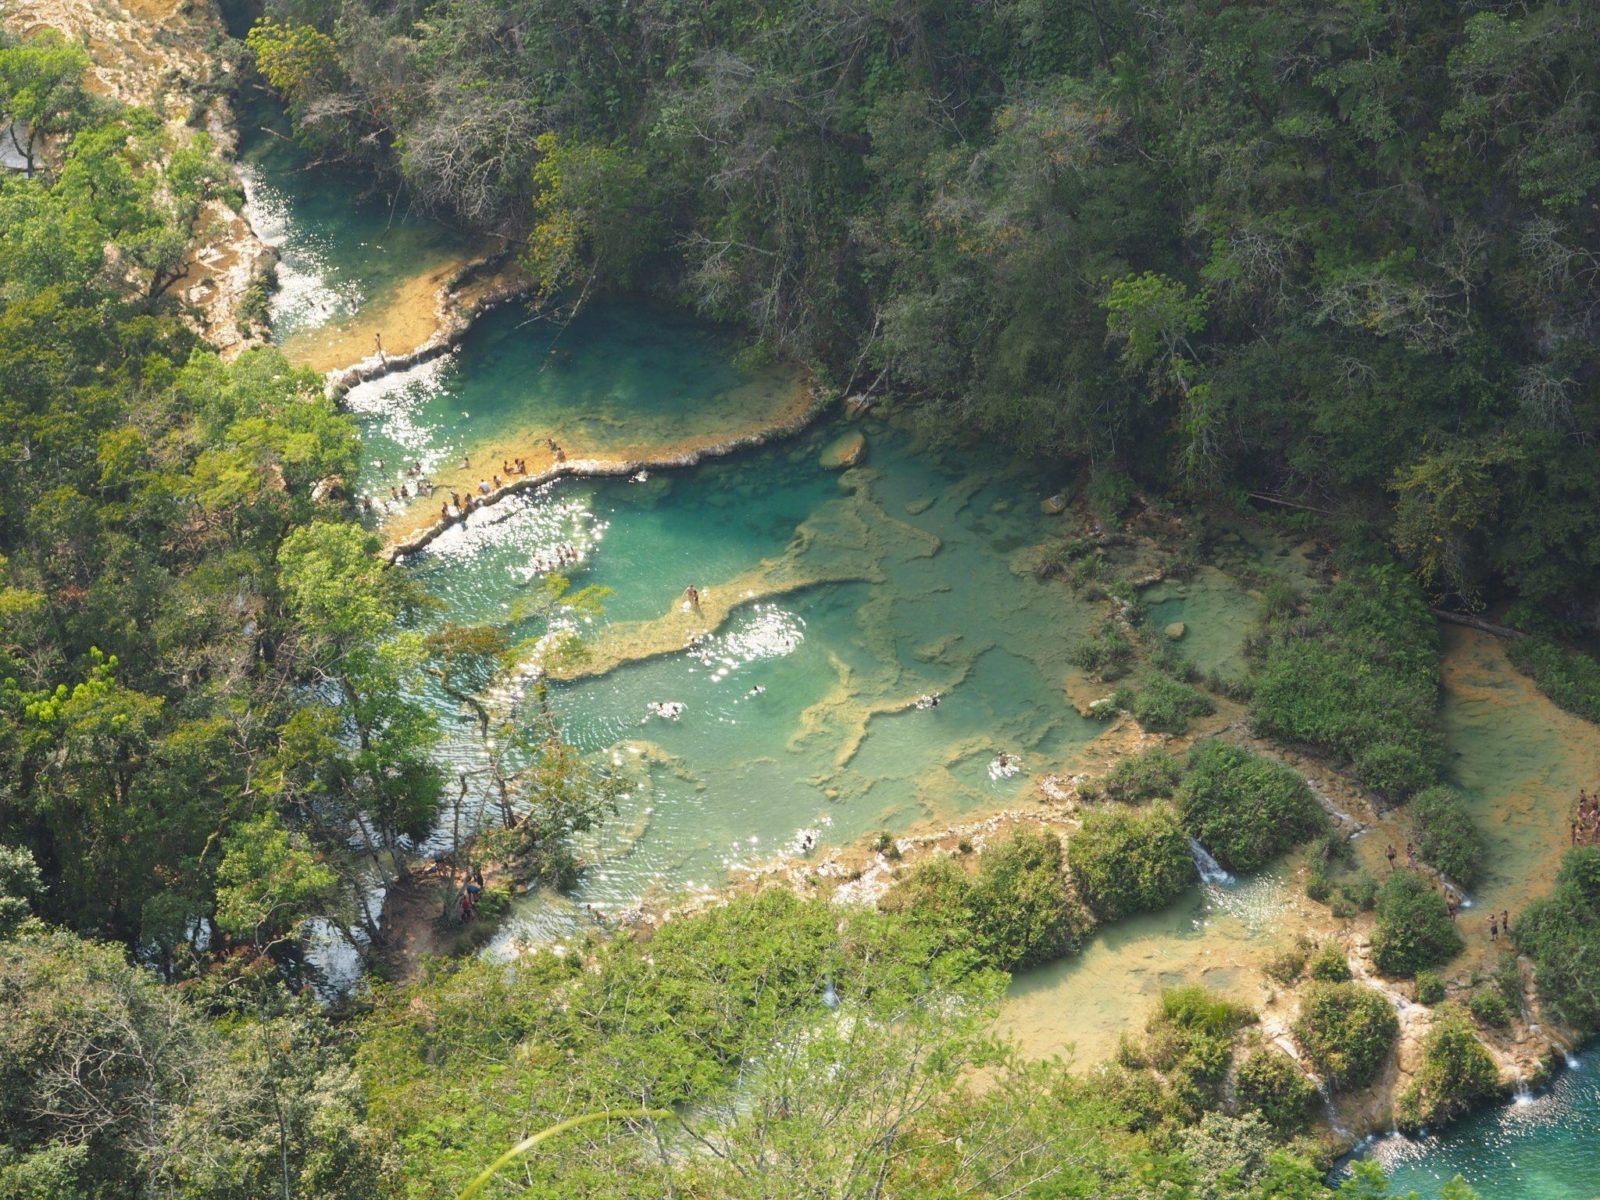 How to get from Antigua to Semuc Champey